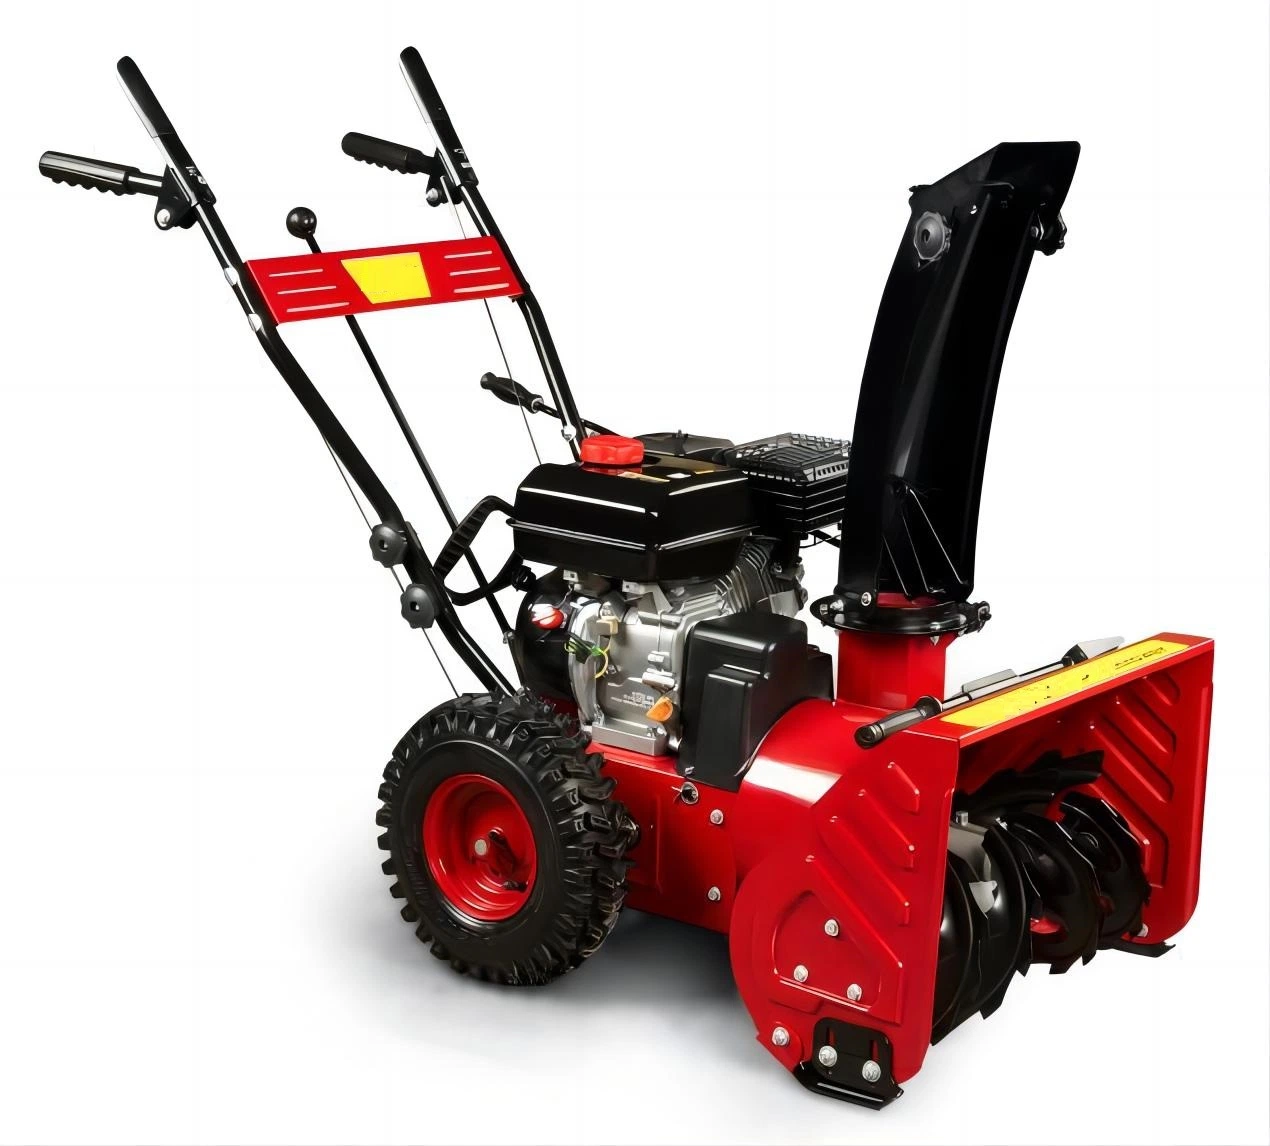 New Powerful Design-14inch Professional-AC Electric-Starter System-8HP Petrol Enginer-Snow Blowers/Thrower/Plows-Garden Power-Tool Machines